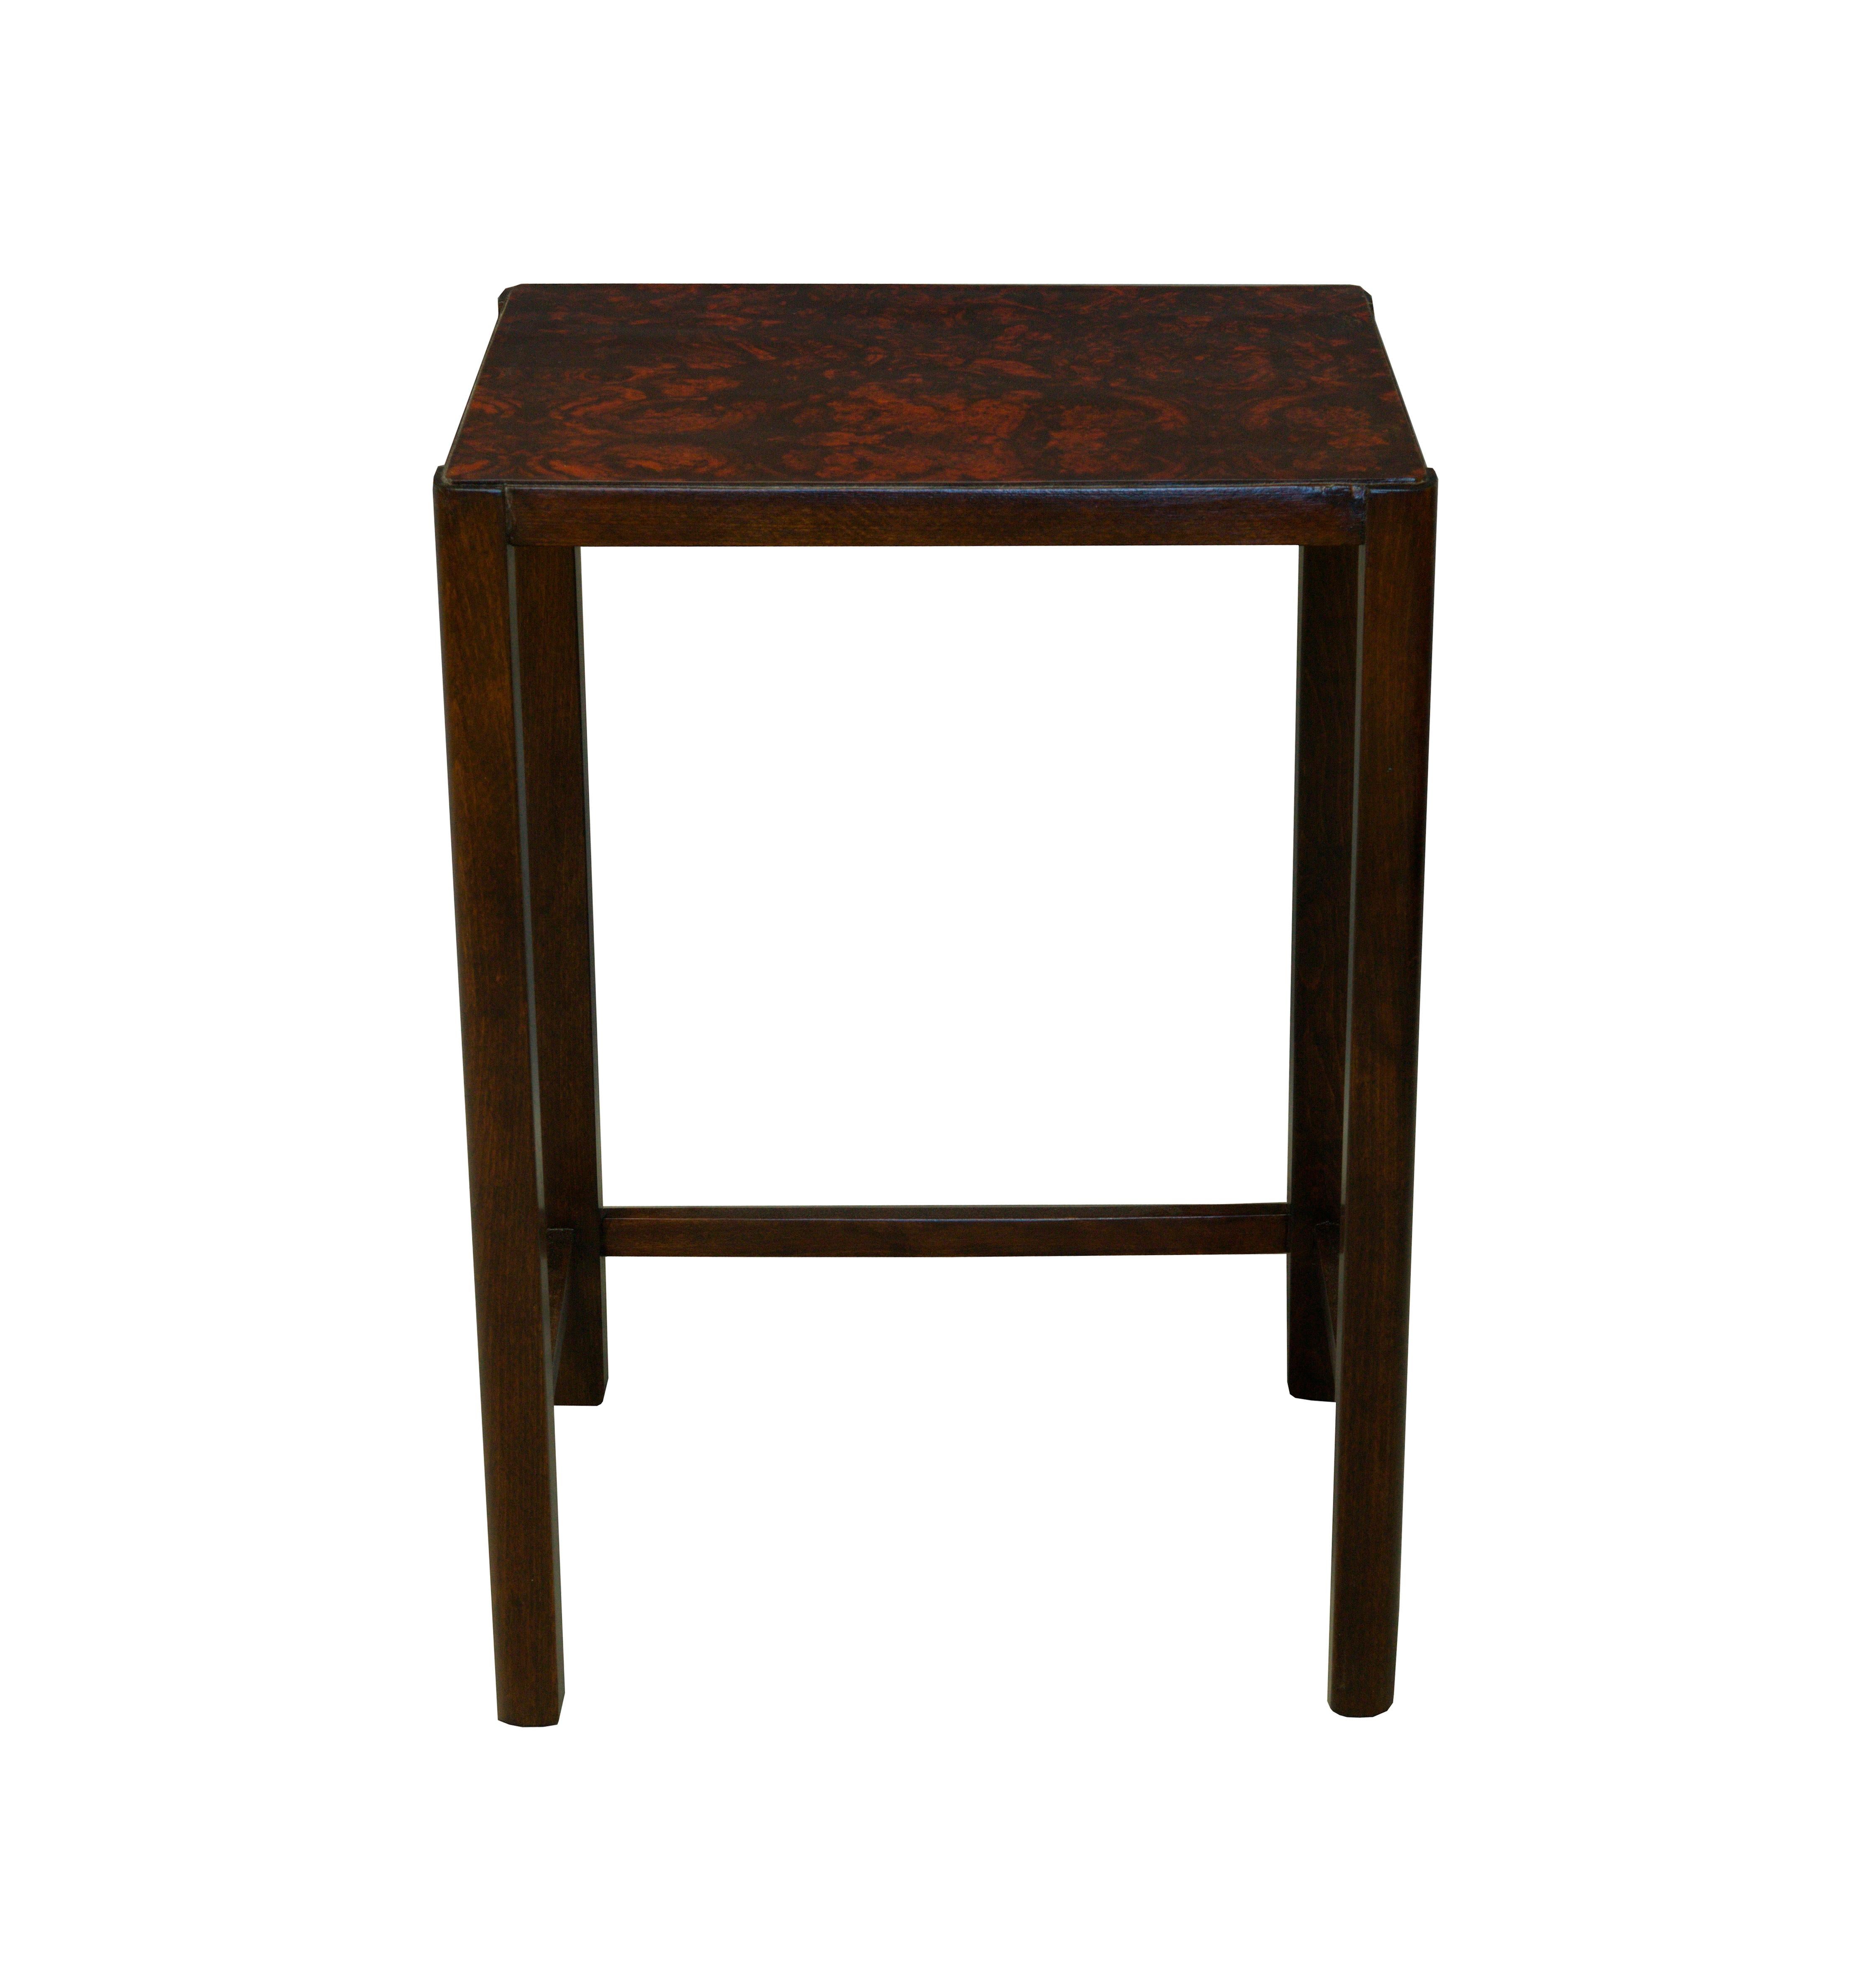 This Minimalistic wooden side table was produced by Thonet Company in the 1930s.
The table is made of beech wood like many of the Thonet famous pieces, but what makes this piece very rare is the stunning imitation of ivory on the worktop.
This is